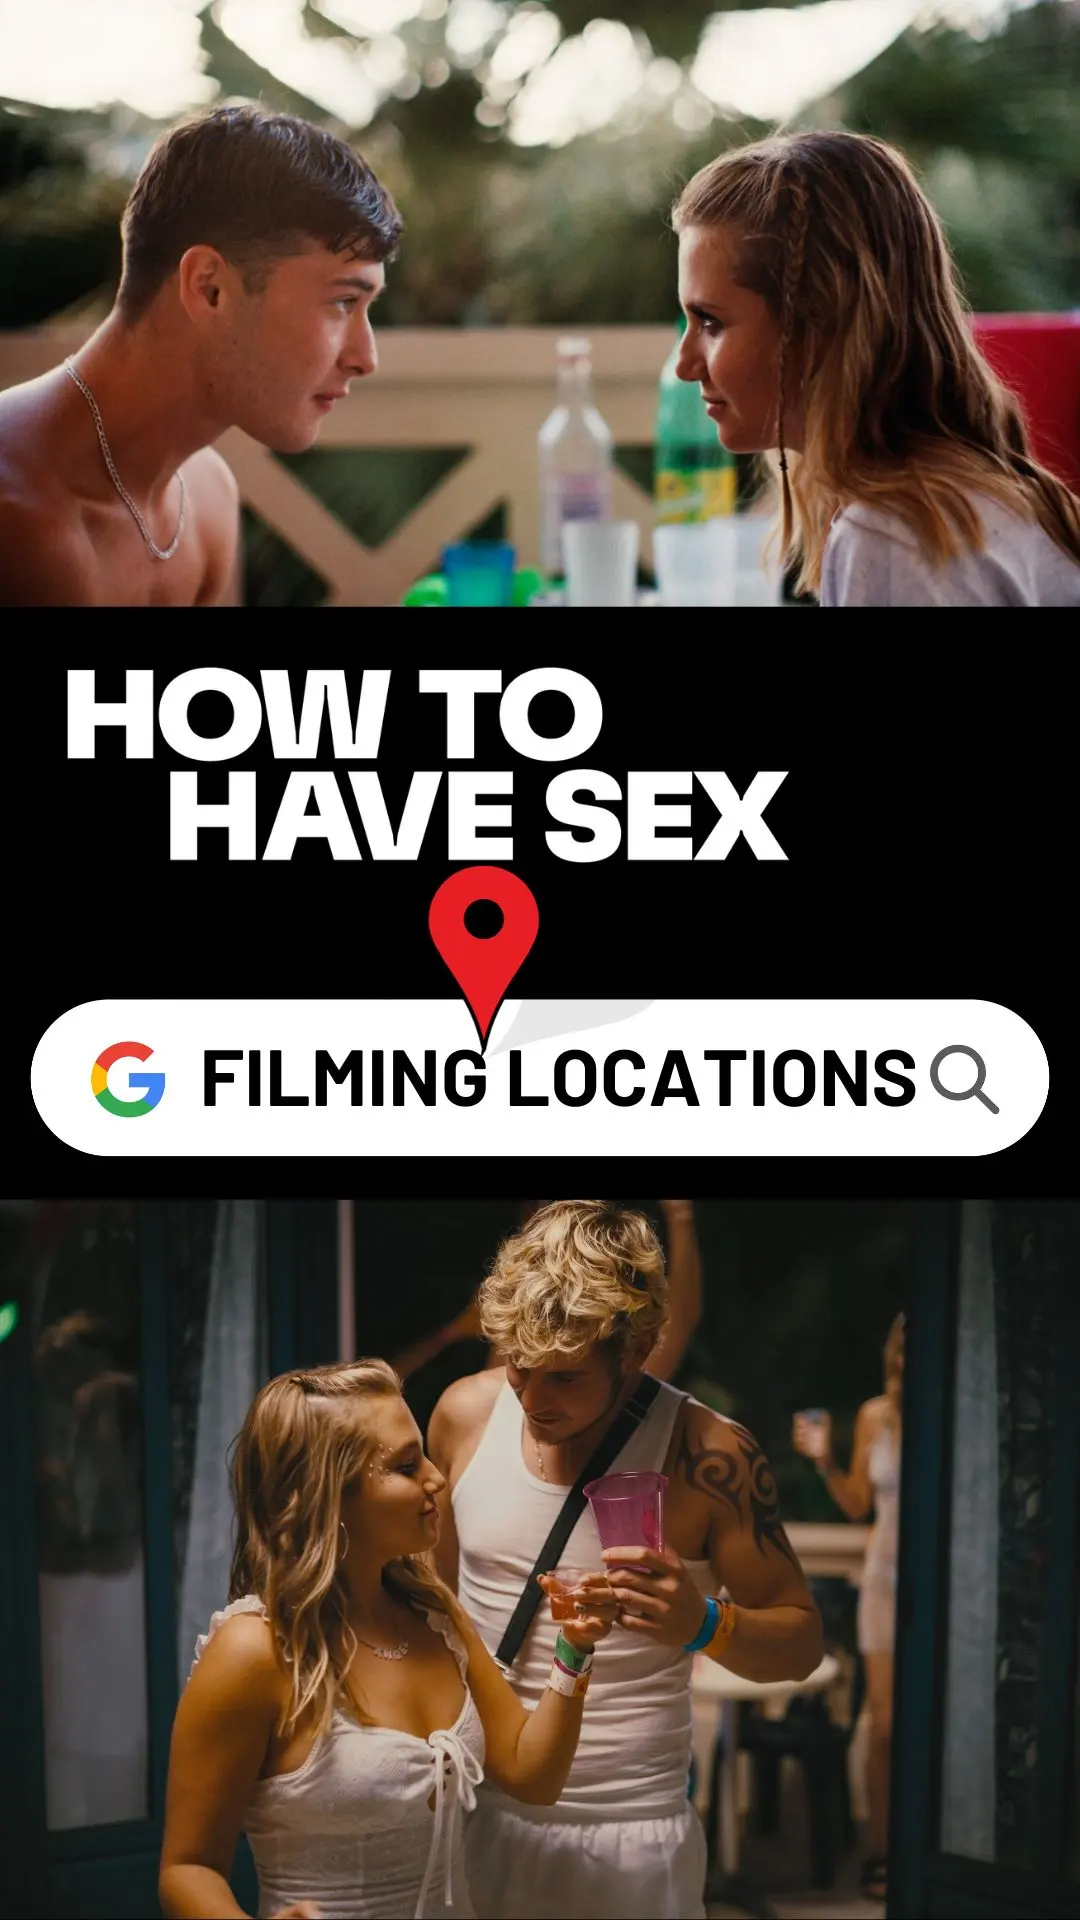 How to Have Sex Filming Location